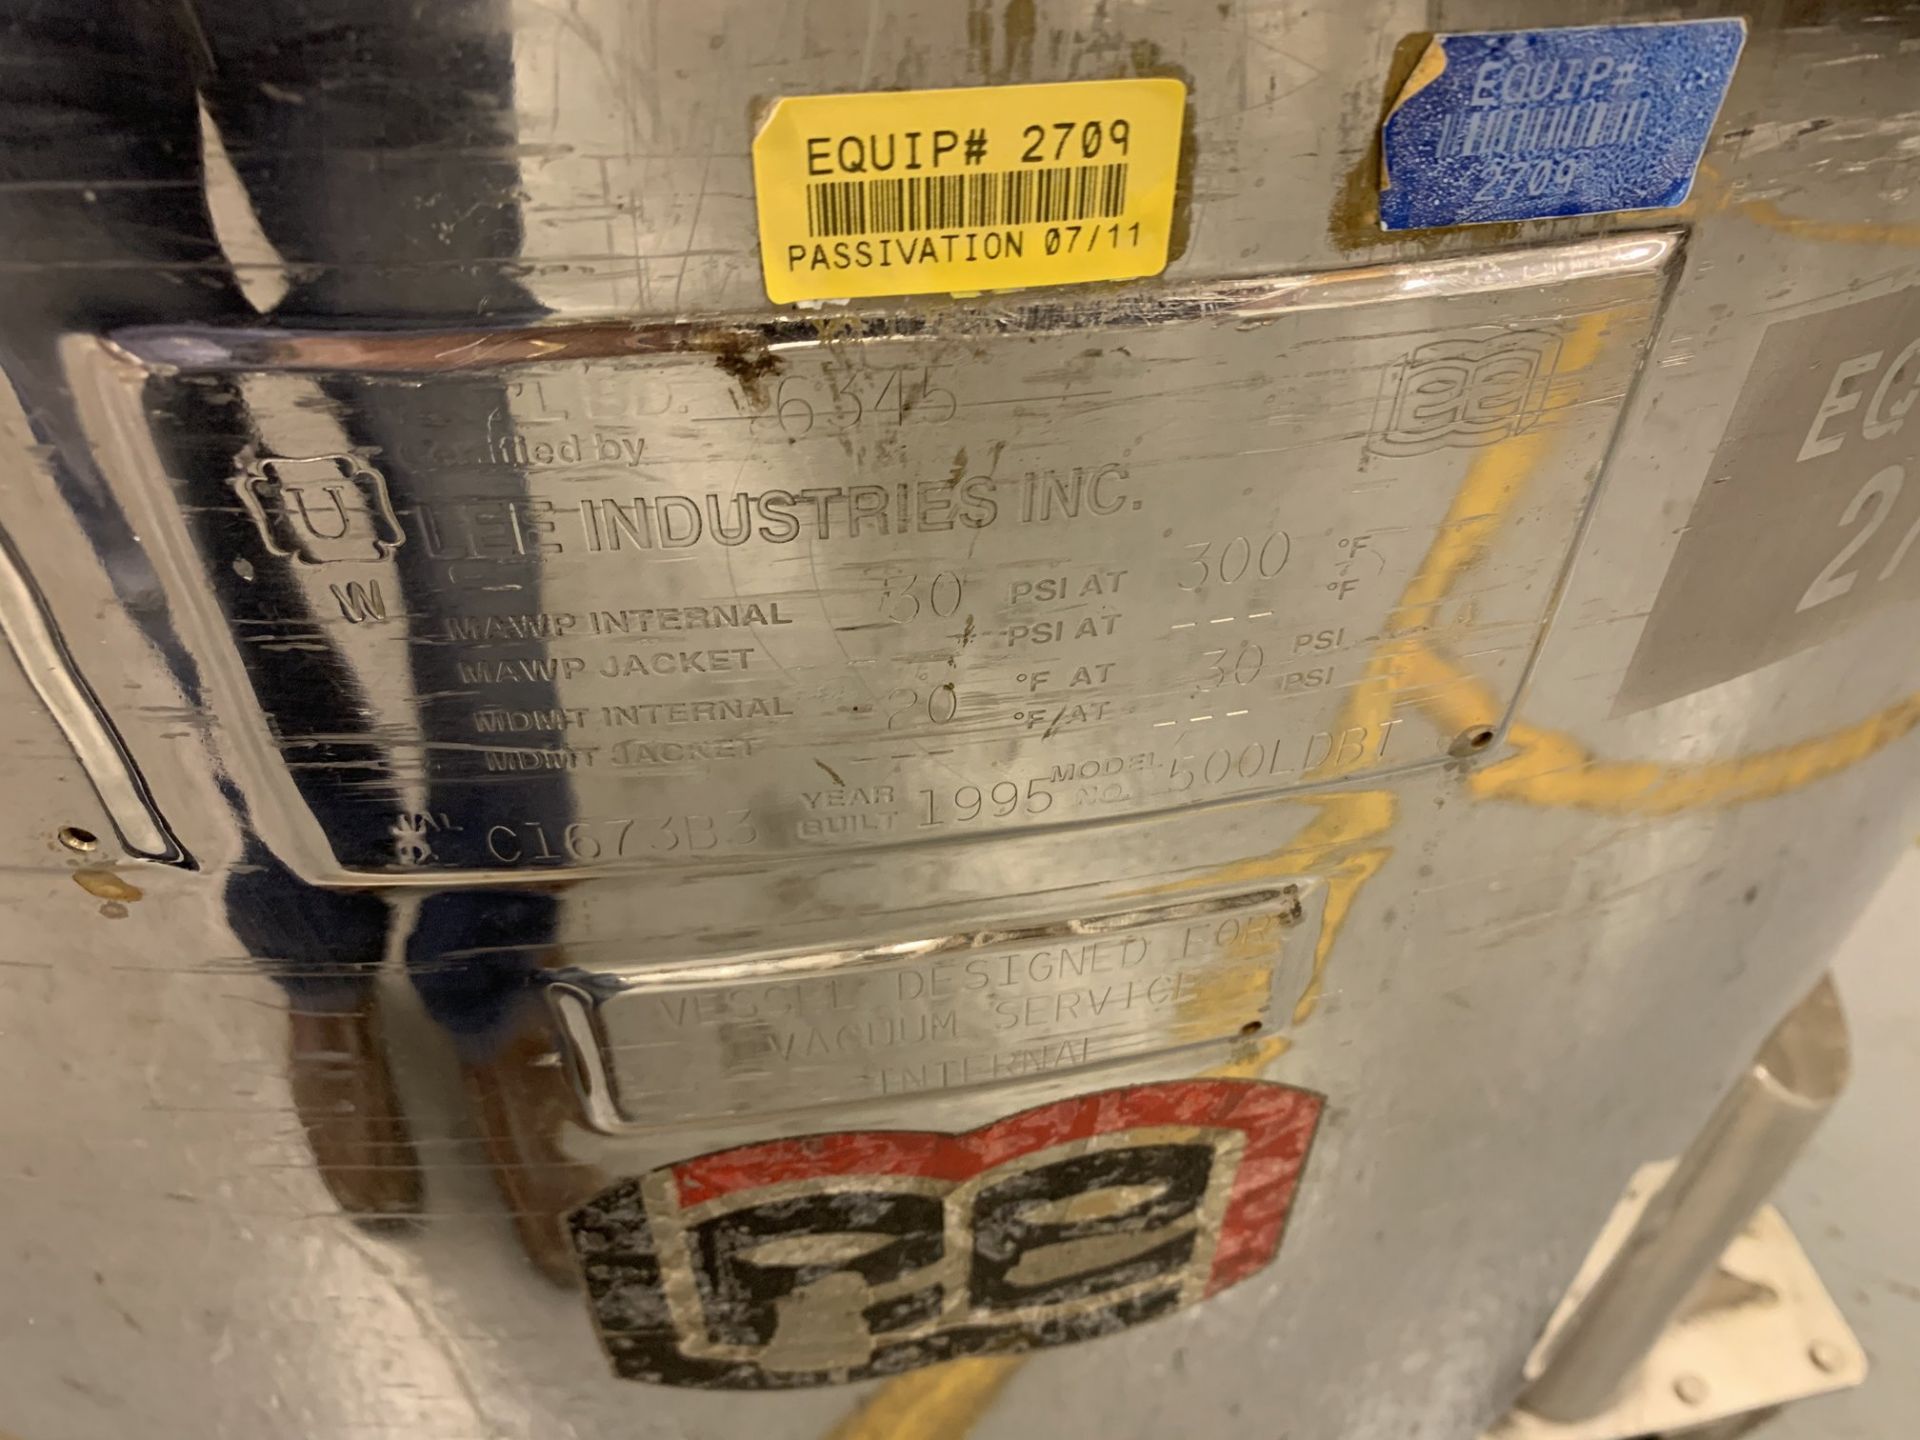 Lot # 79 - Lee Industries Vacuum Kettle, Stainless Steel, 500 Liter, Propellor agitator without - Image 3 of 3